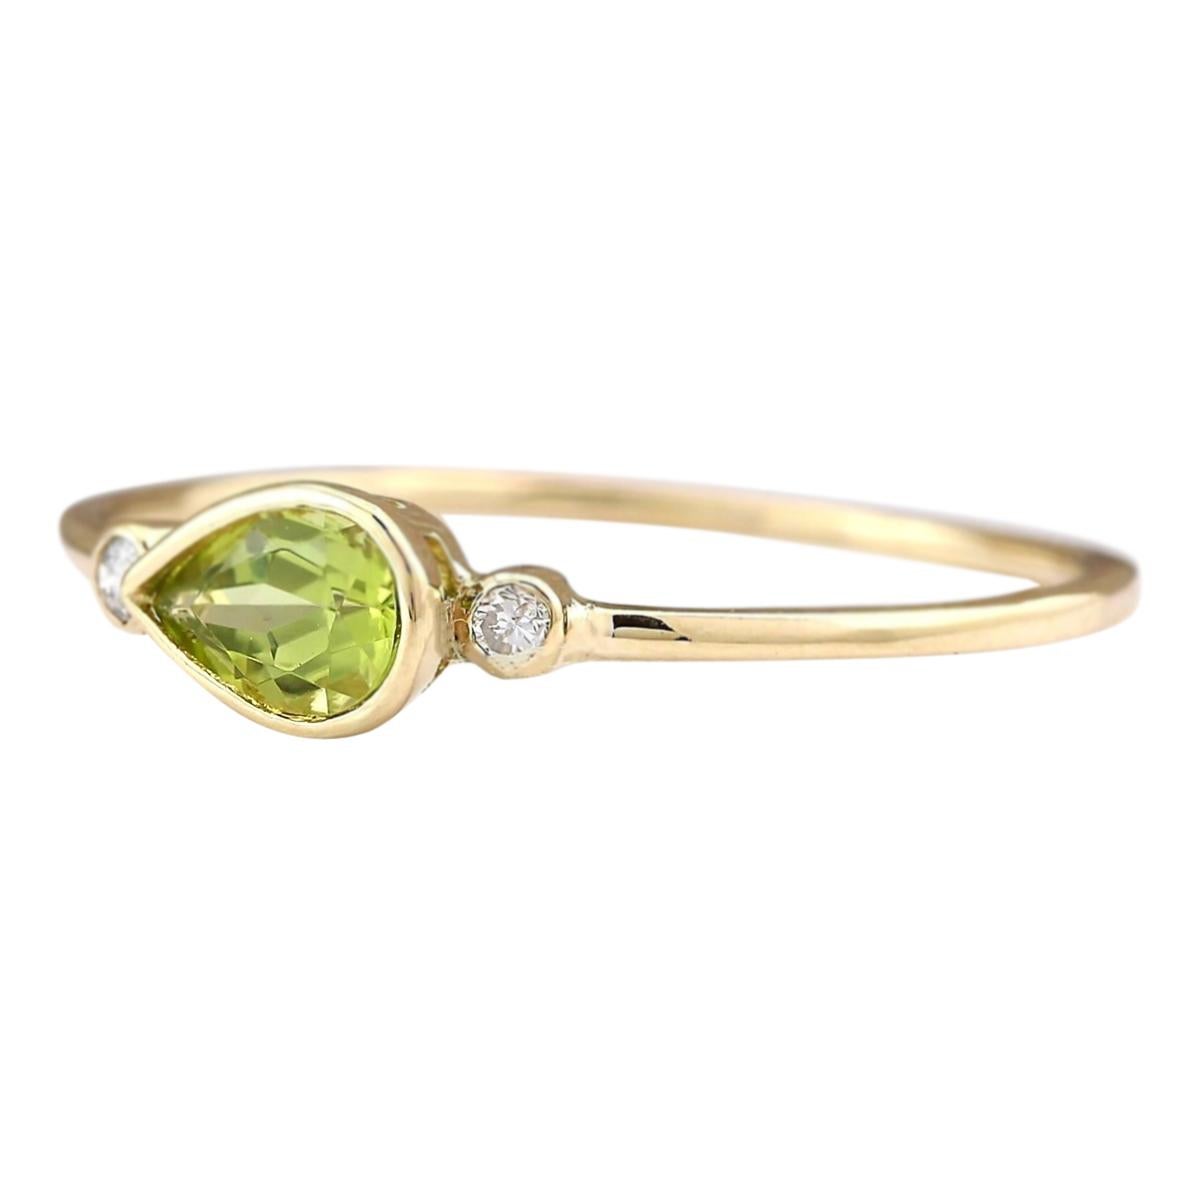 Stamped: 14K Yellow Gold
Total Ring Weight: 1.1 Grams
Total Natural Peridot Weight is 0.50 Carat (Measures: 7.00x5.00 mm)
Color: Green
Diamond Weight: Total Natural Diamond Weight is 0.08 Carat
Color: F-G, Clarity: VS2-SI1
Face Measures: 5.00x11.40